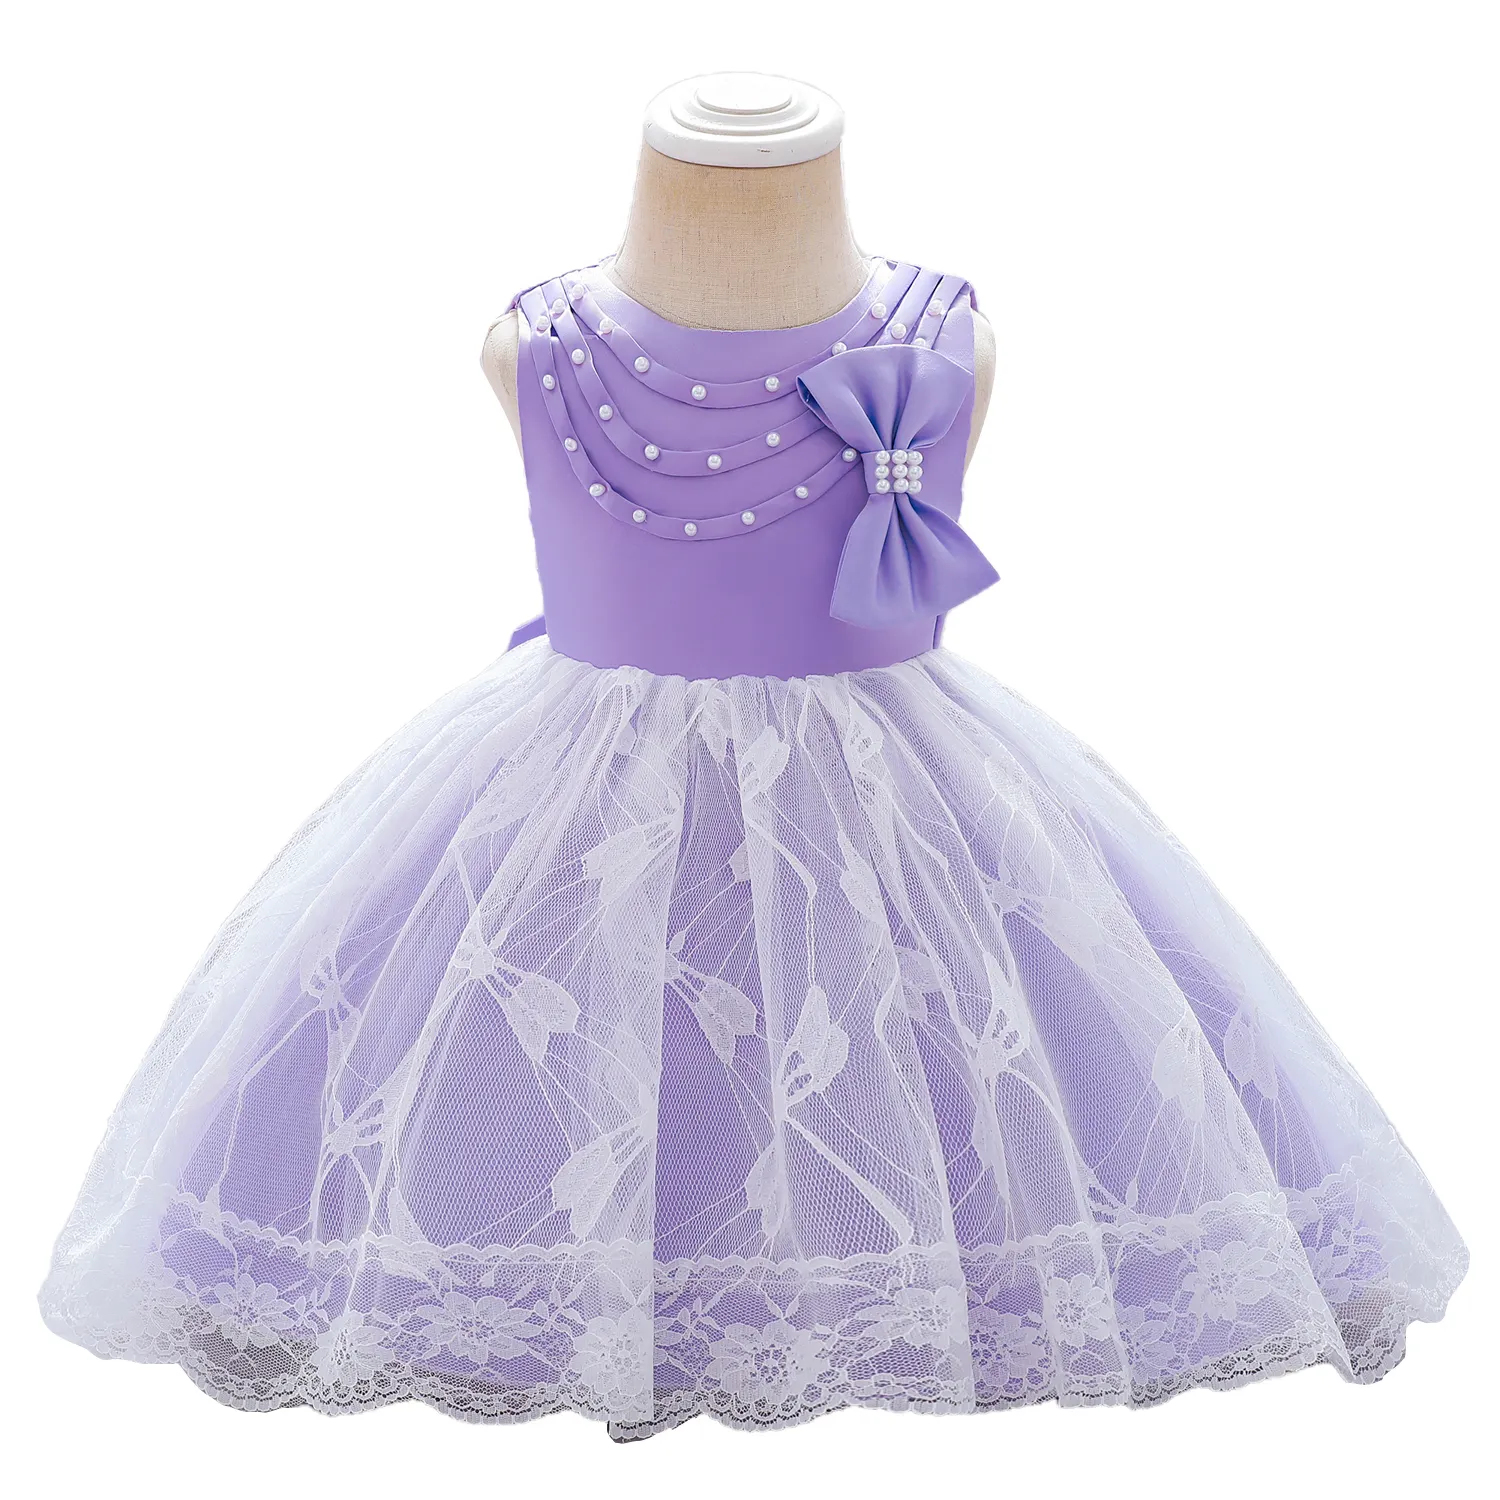 High Quality Korea Boutique Summer Lace Birthday Ball Gown Petal Princess Kid 10 Year Old Children Baby Girl Dresses For Party